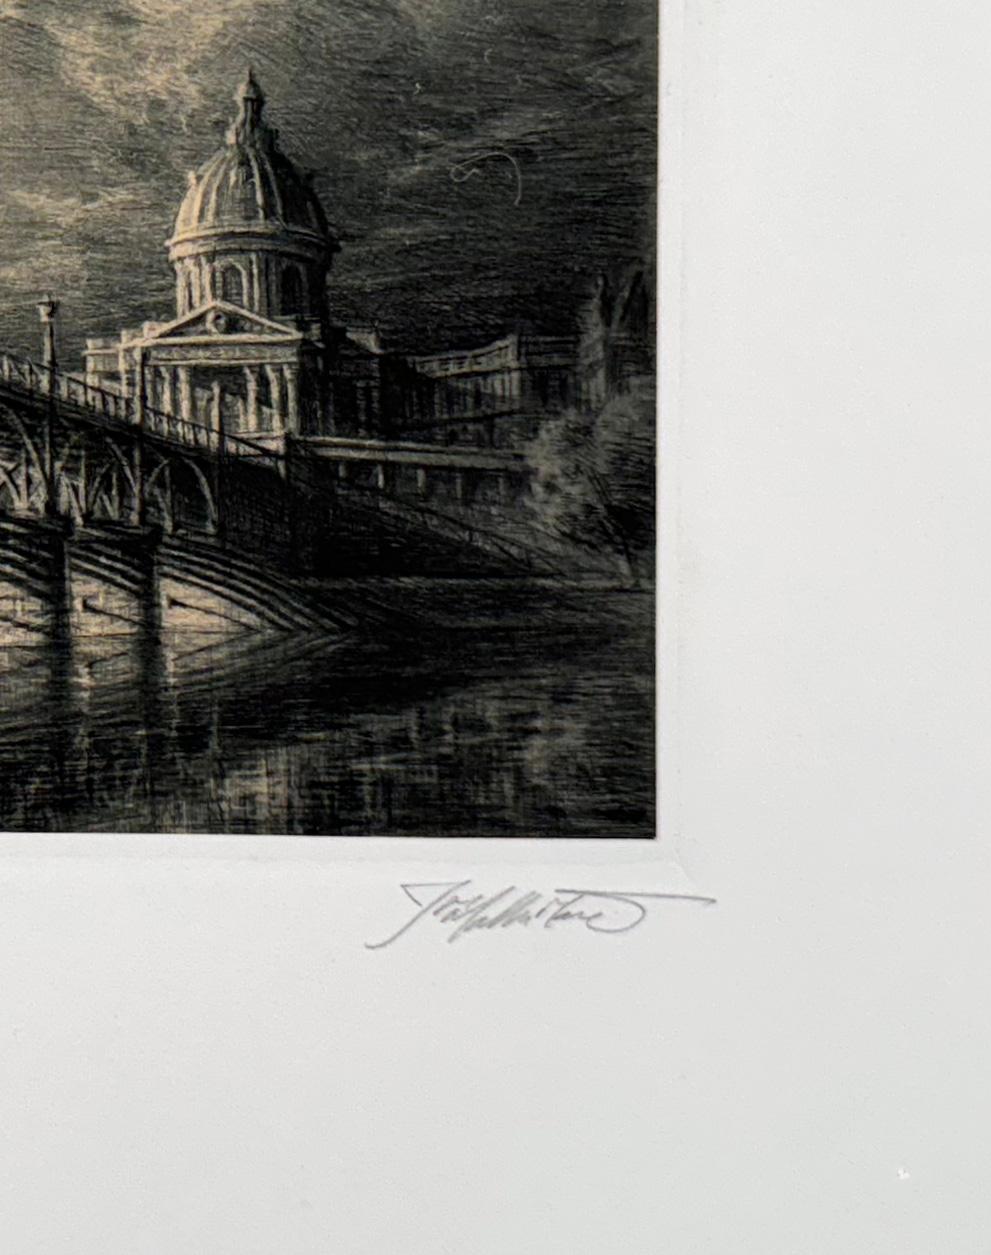 Medium: drypoint on chine collé
Edition of 180
Image Size: 4.5 X 9 inches
Signed, titled and numbered, from the edition of 180. 

A view of a bridge over the Seine River in Paris with a view of The Palais de l’Institut de France in the